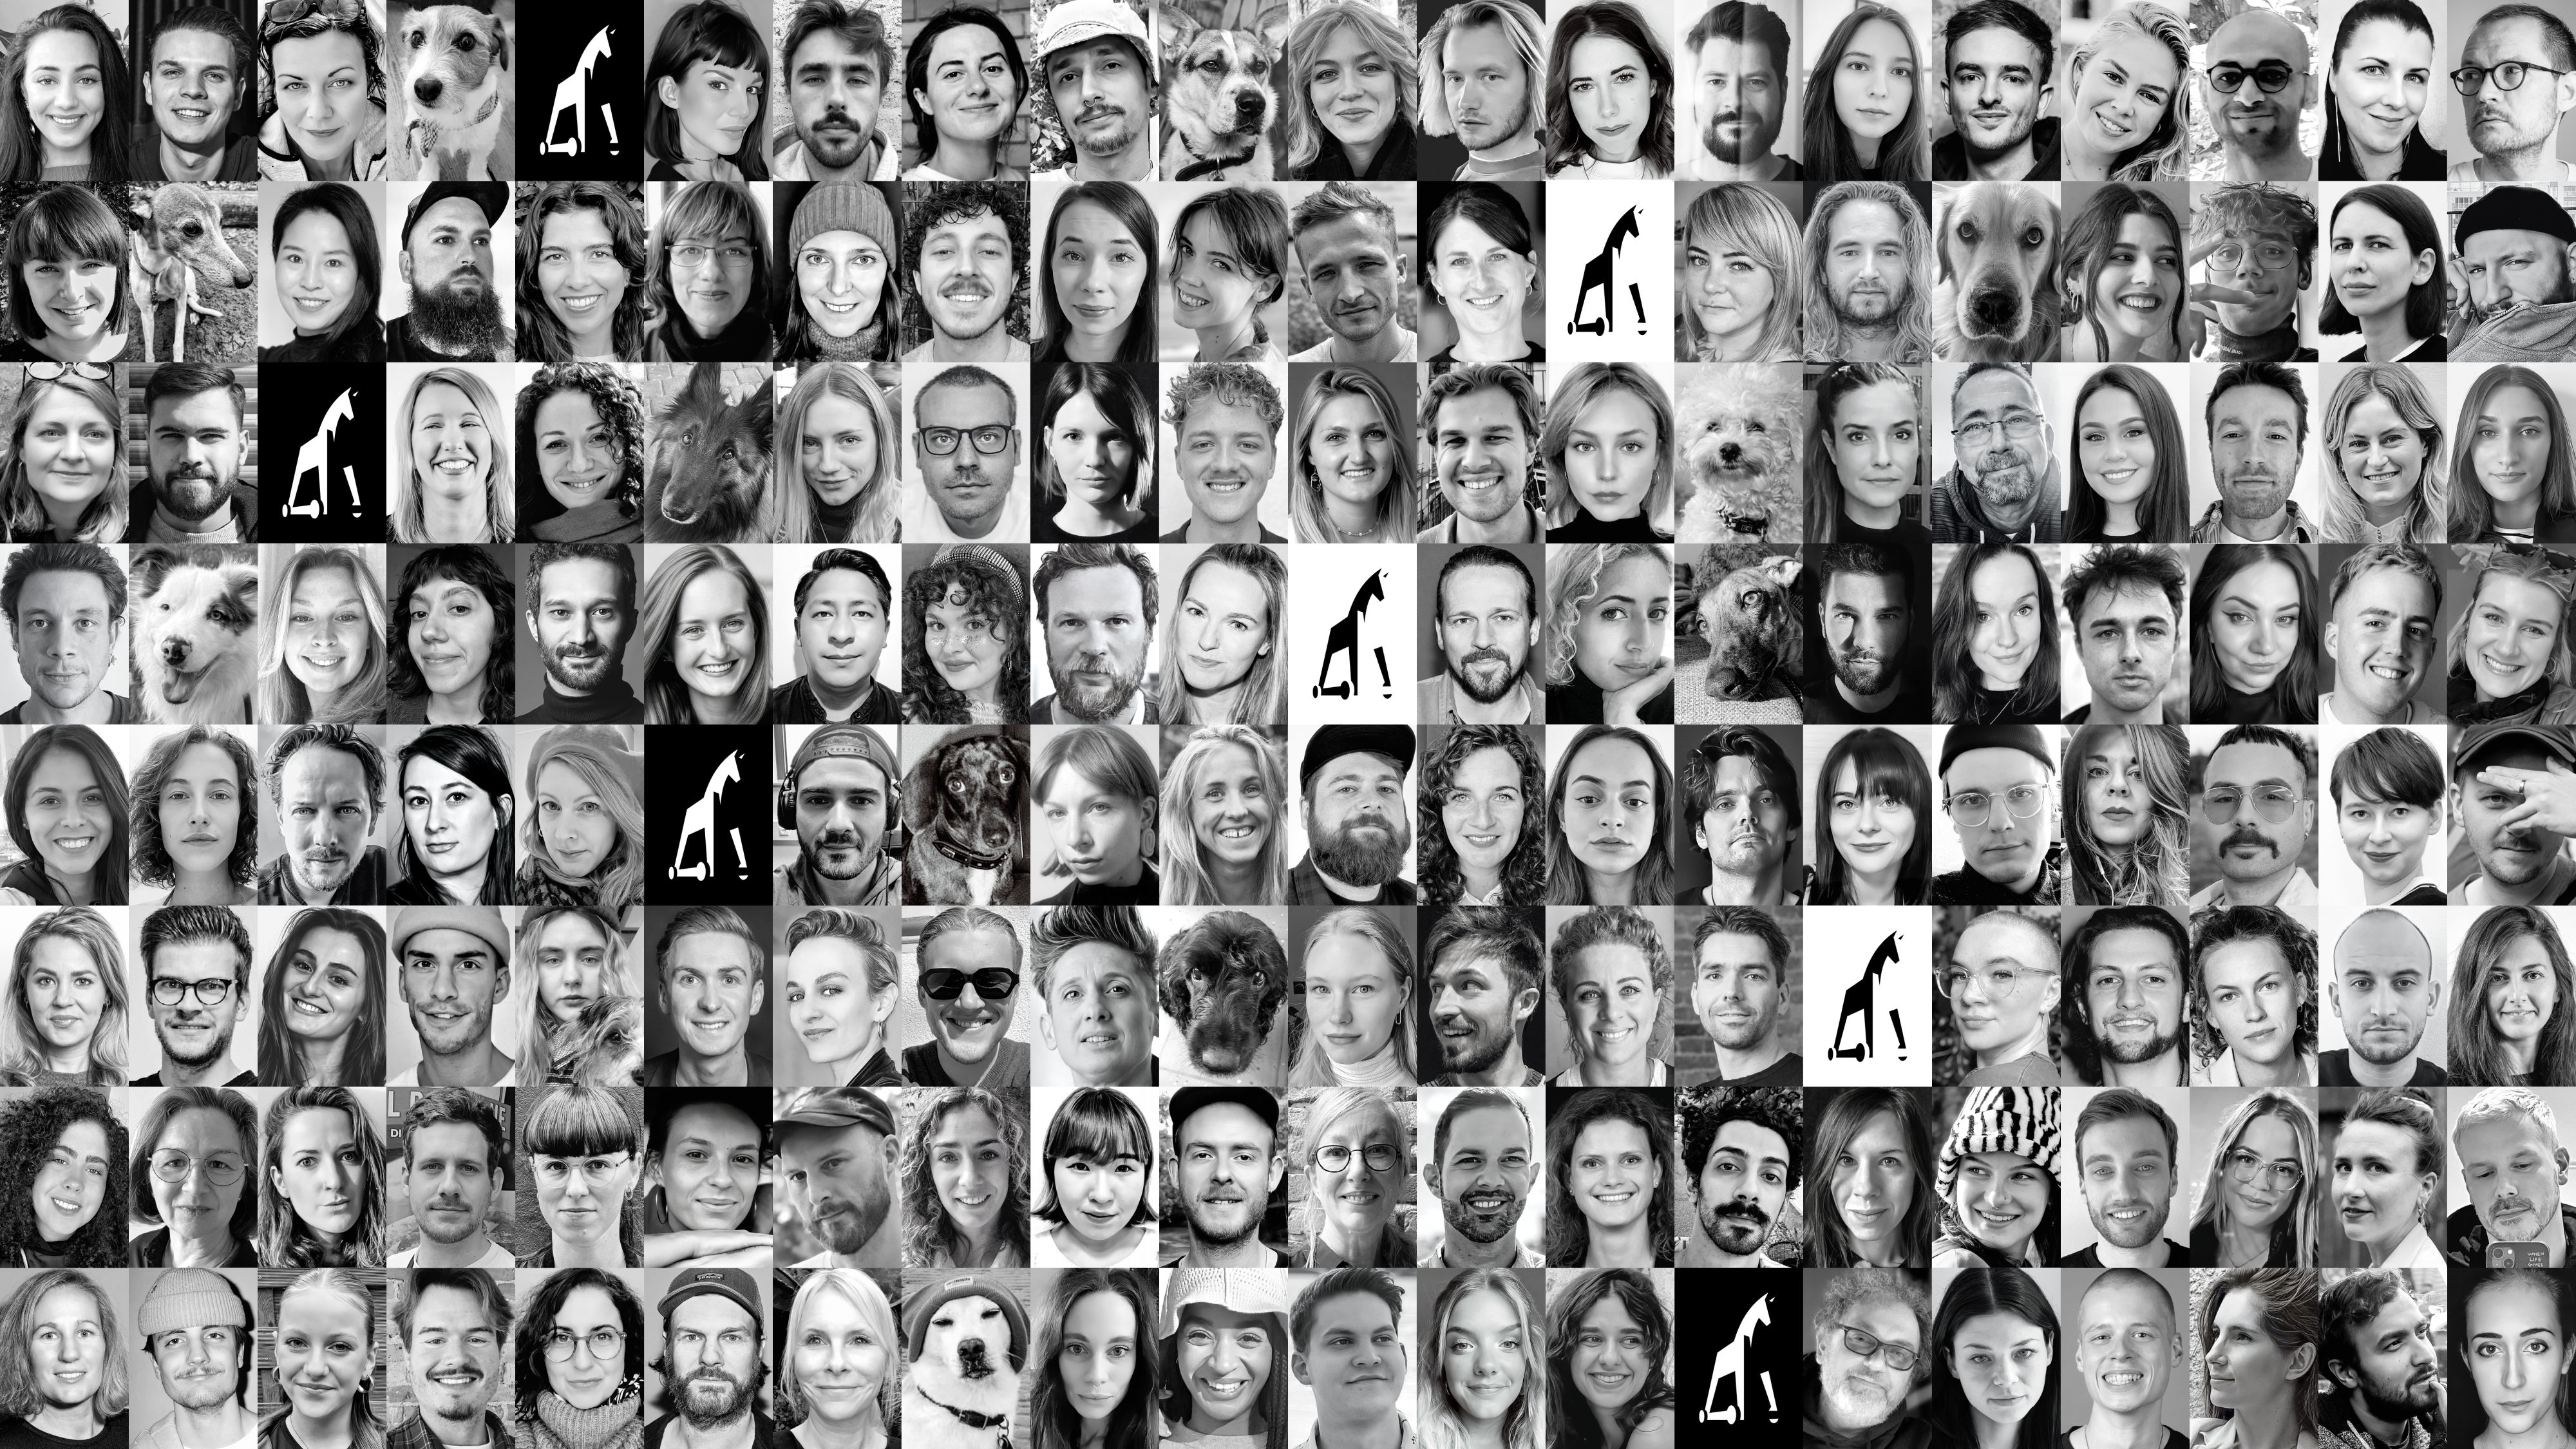 Image of several facial portraits of Jung von Matt SPREE employees in a black and white miniature tile look.